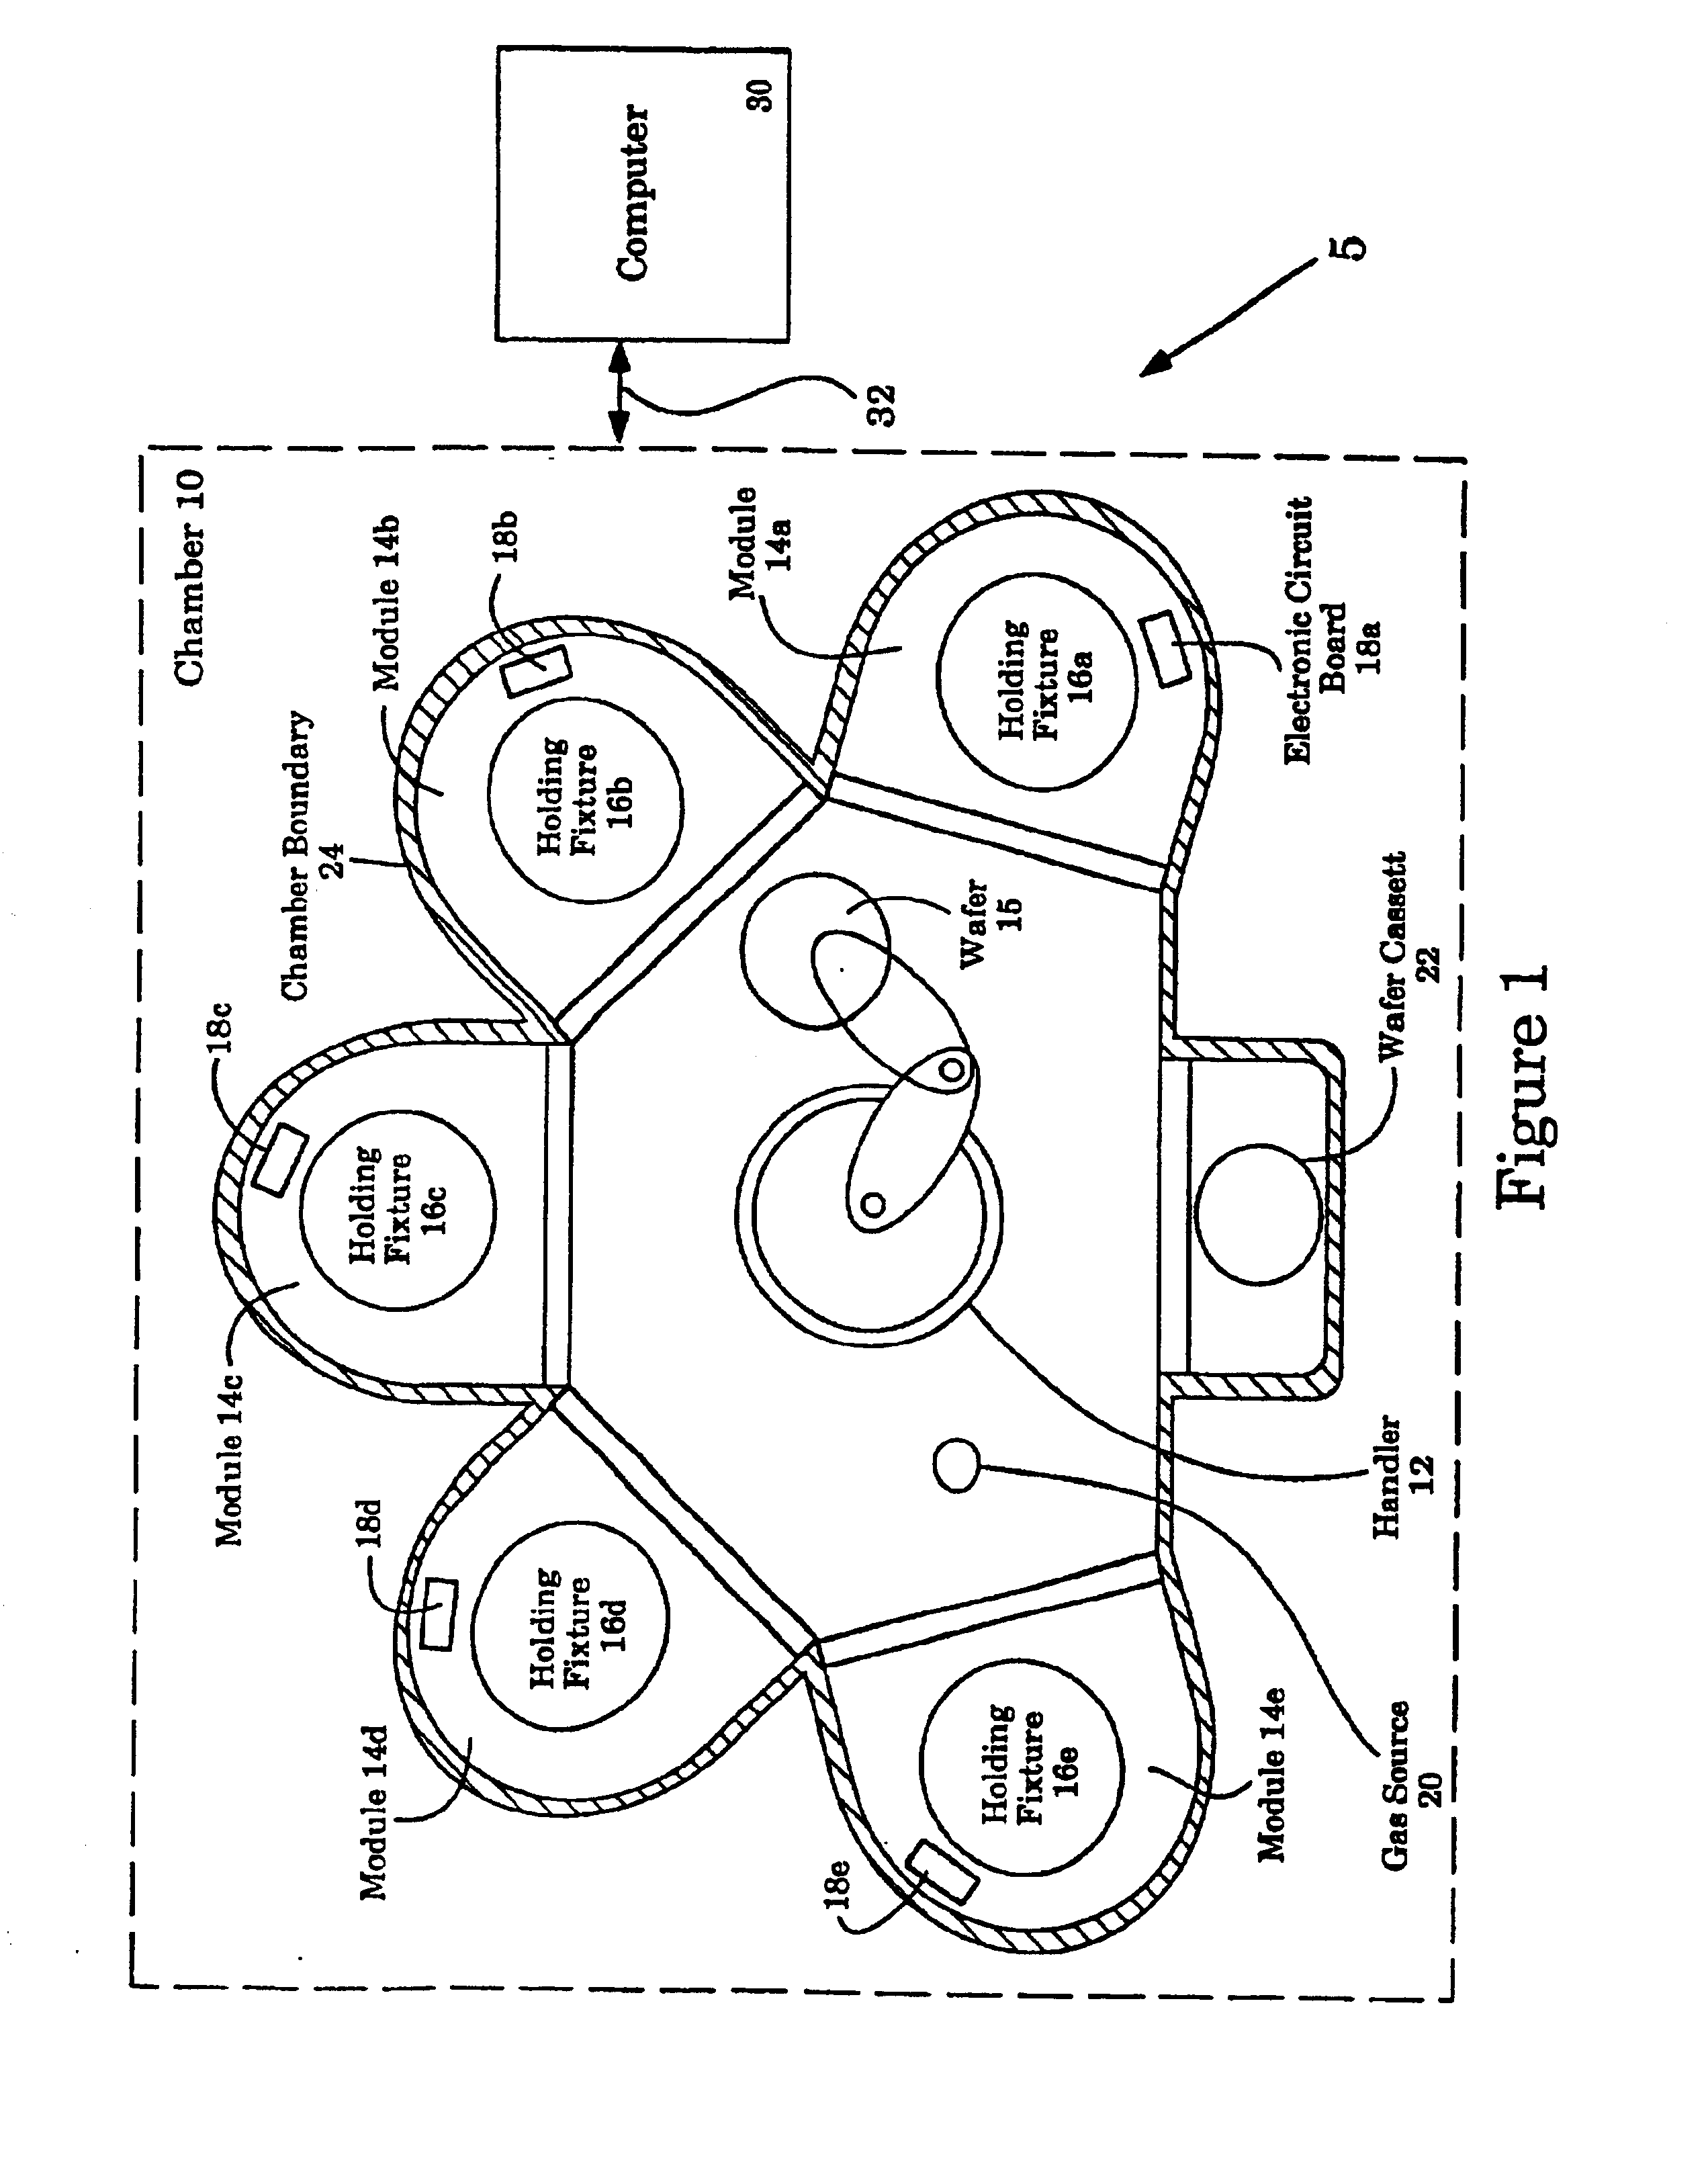 Method and system for probing, testing, burn-in, repairing and programming of integrated circuits in a closed environment using a single apparatus